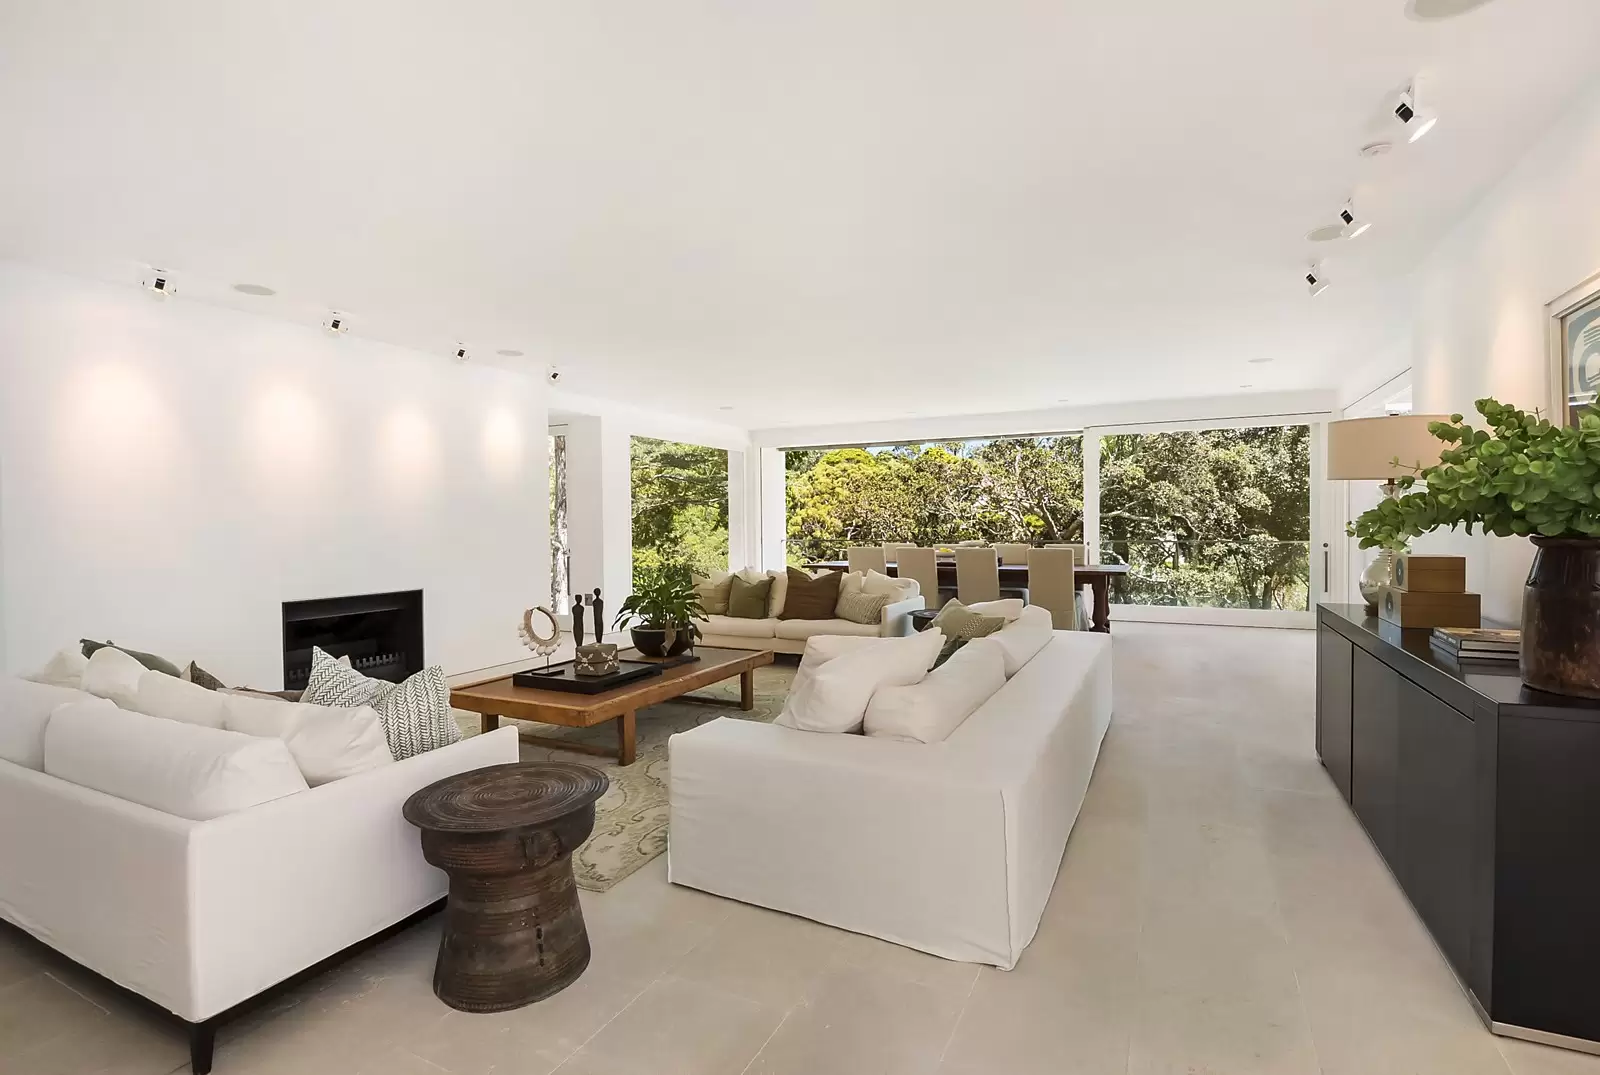 Photo #7: 10 The Crescent, Vaucluse - Sold by Sydney Sotheby's International Realty